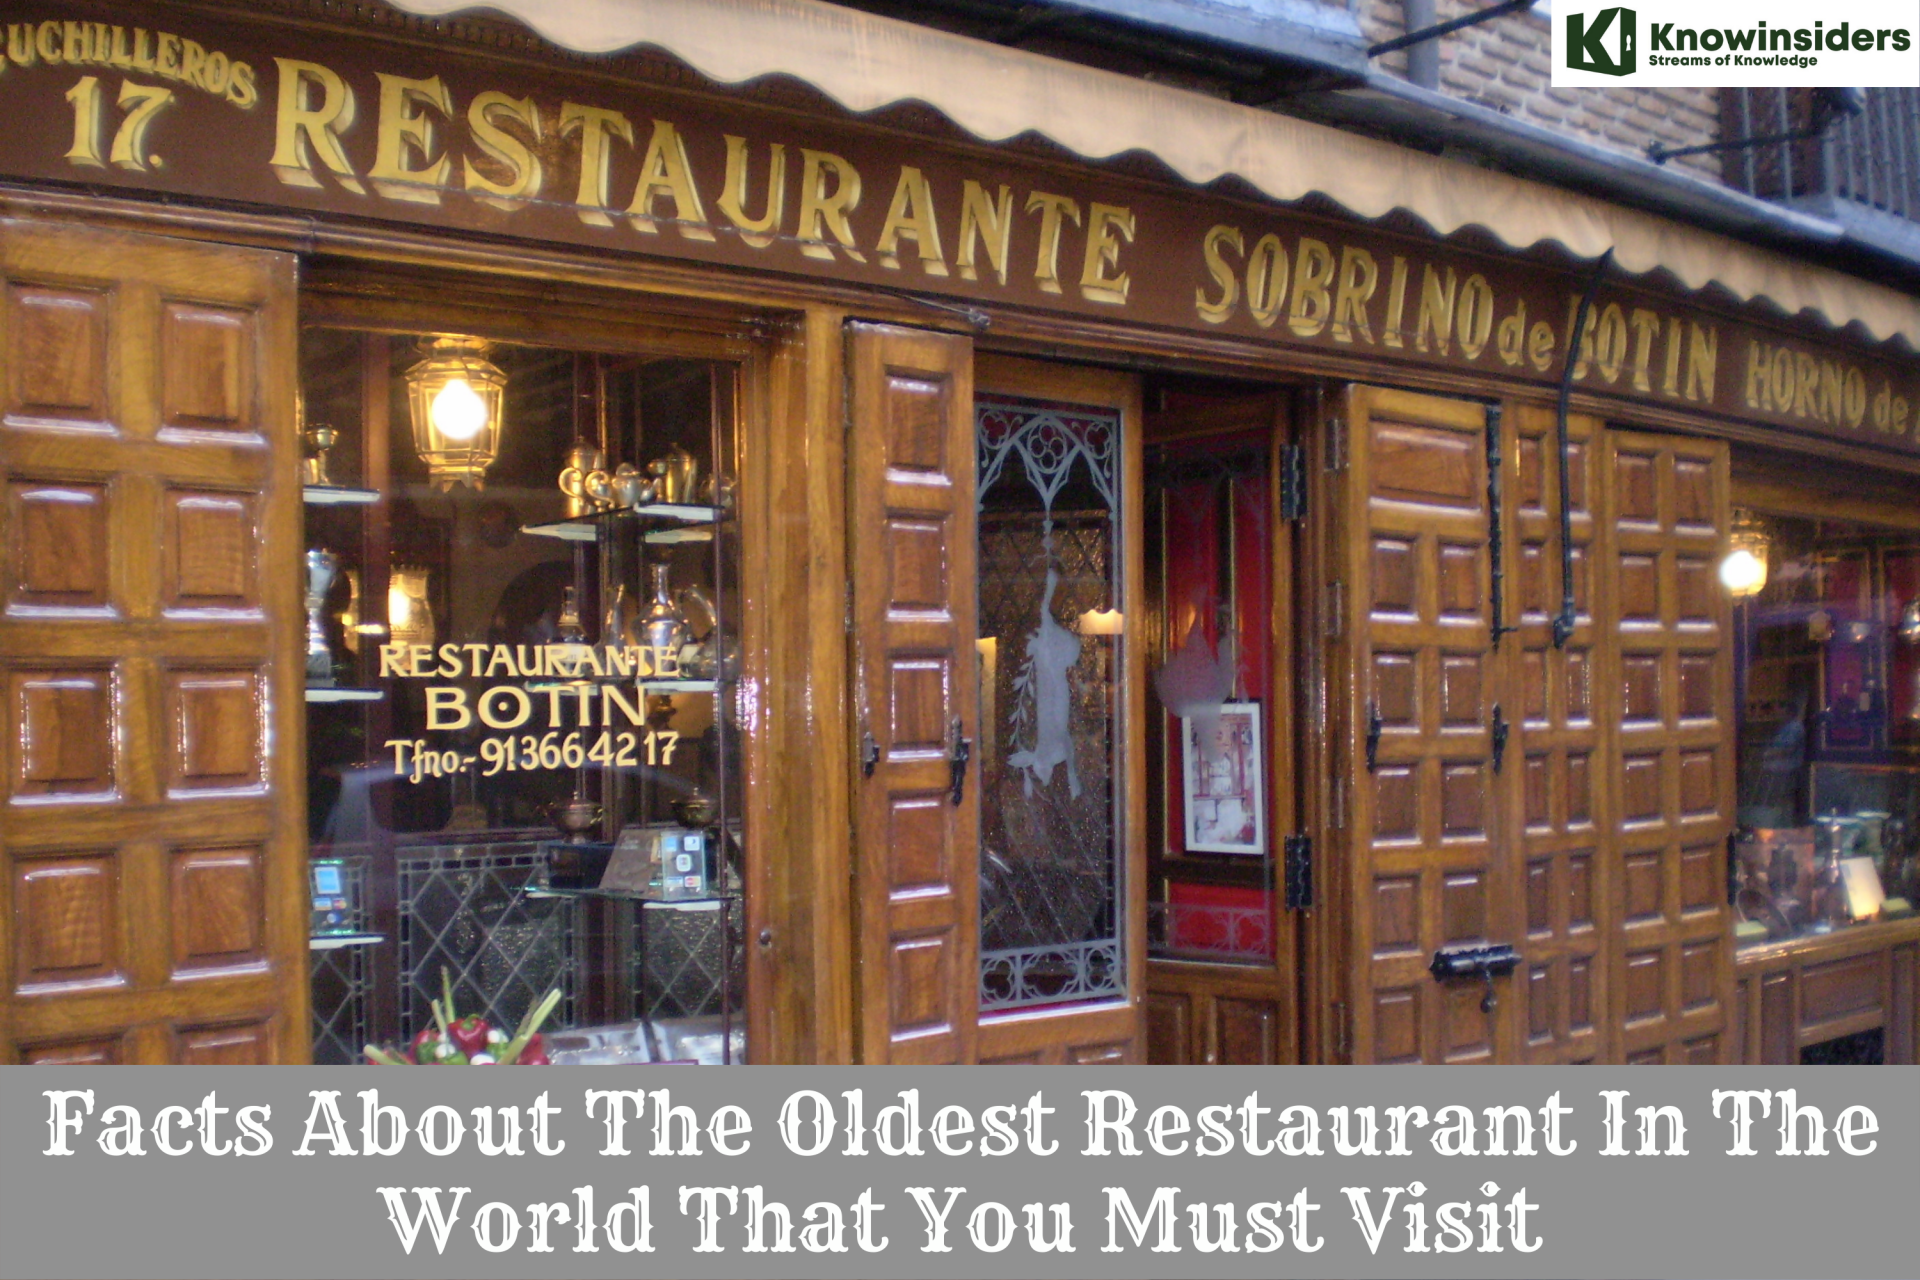 Facts About The Oldest Restaurant In The World That You Must Visit